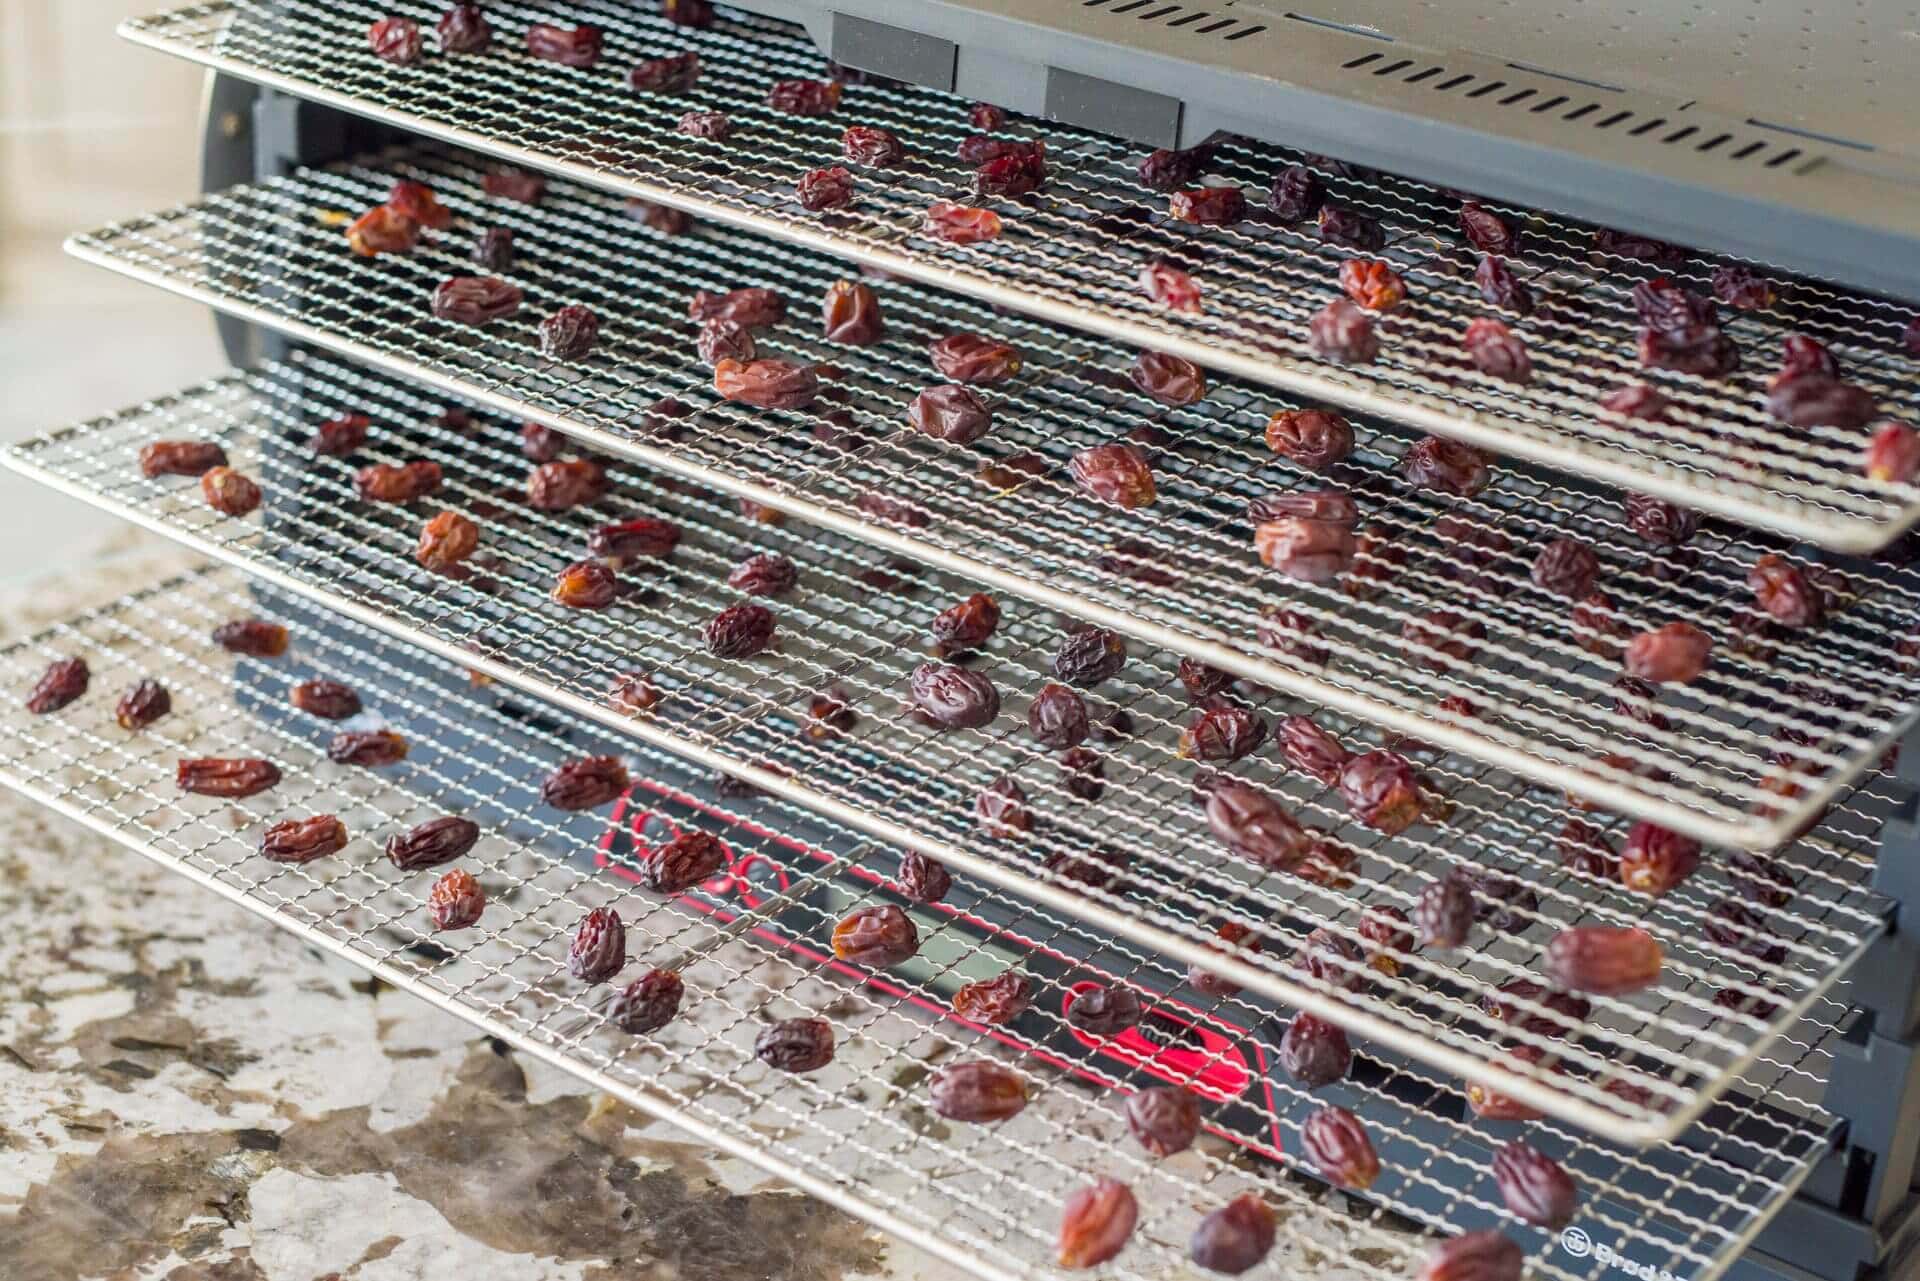 Dehydrated grapes in the B&T Sahara Food Dehydrator via @theperfectloaf